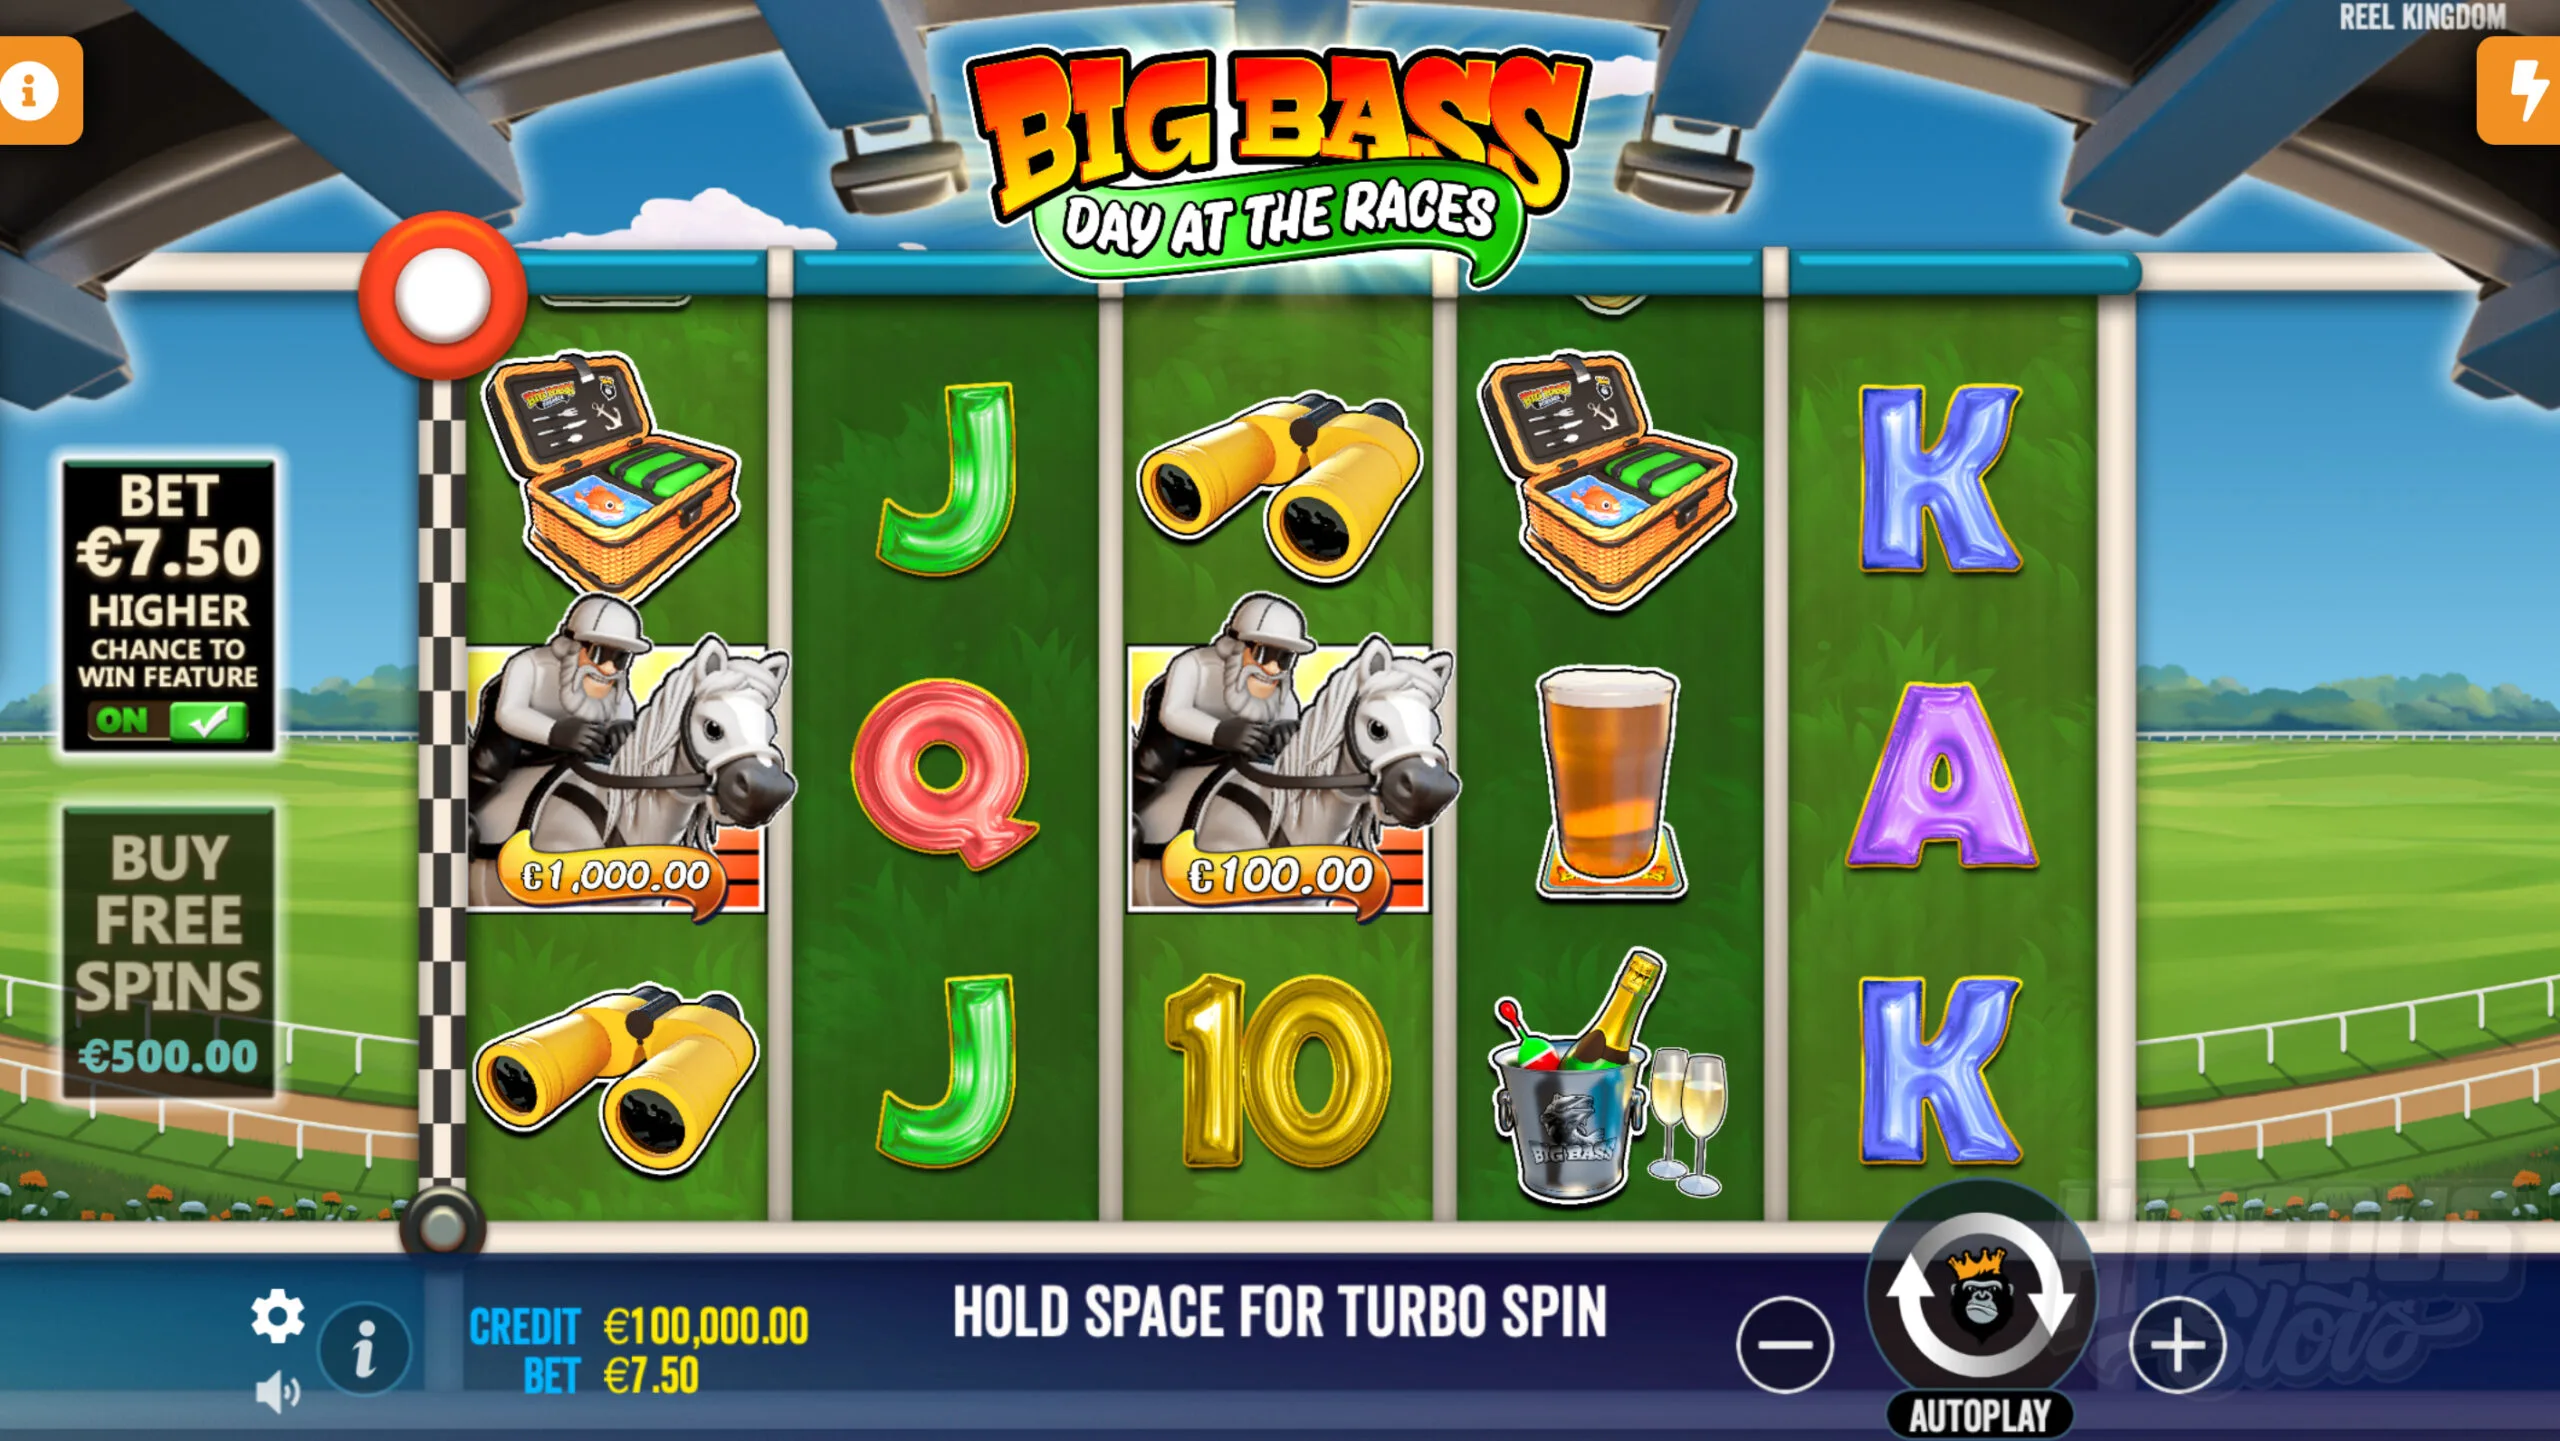 Big Bass Day at the Races Base Game